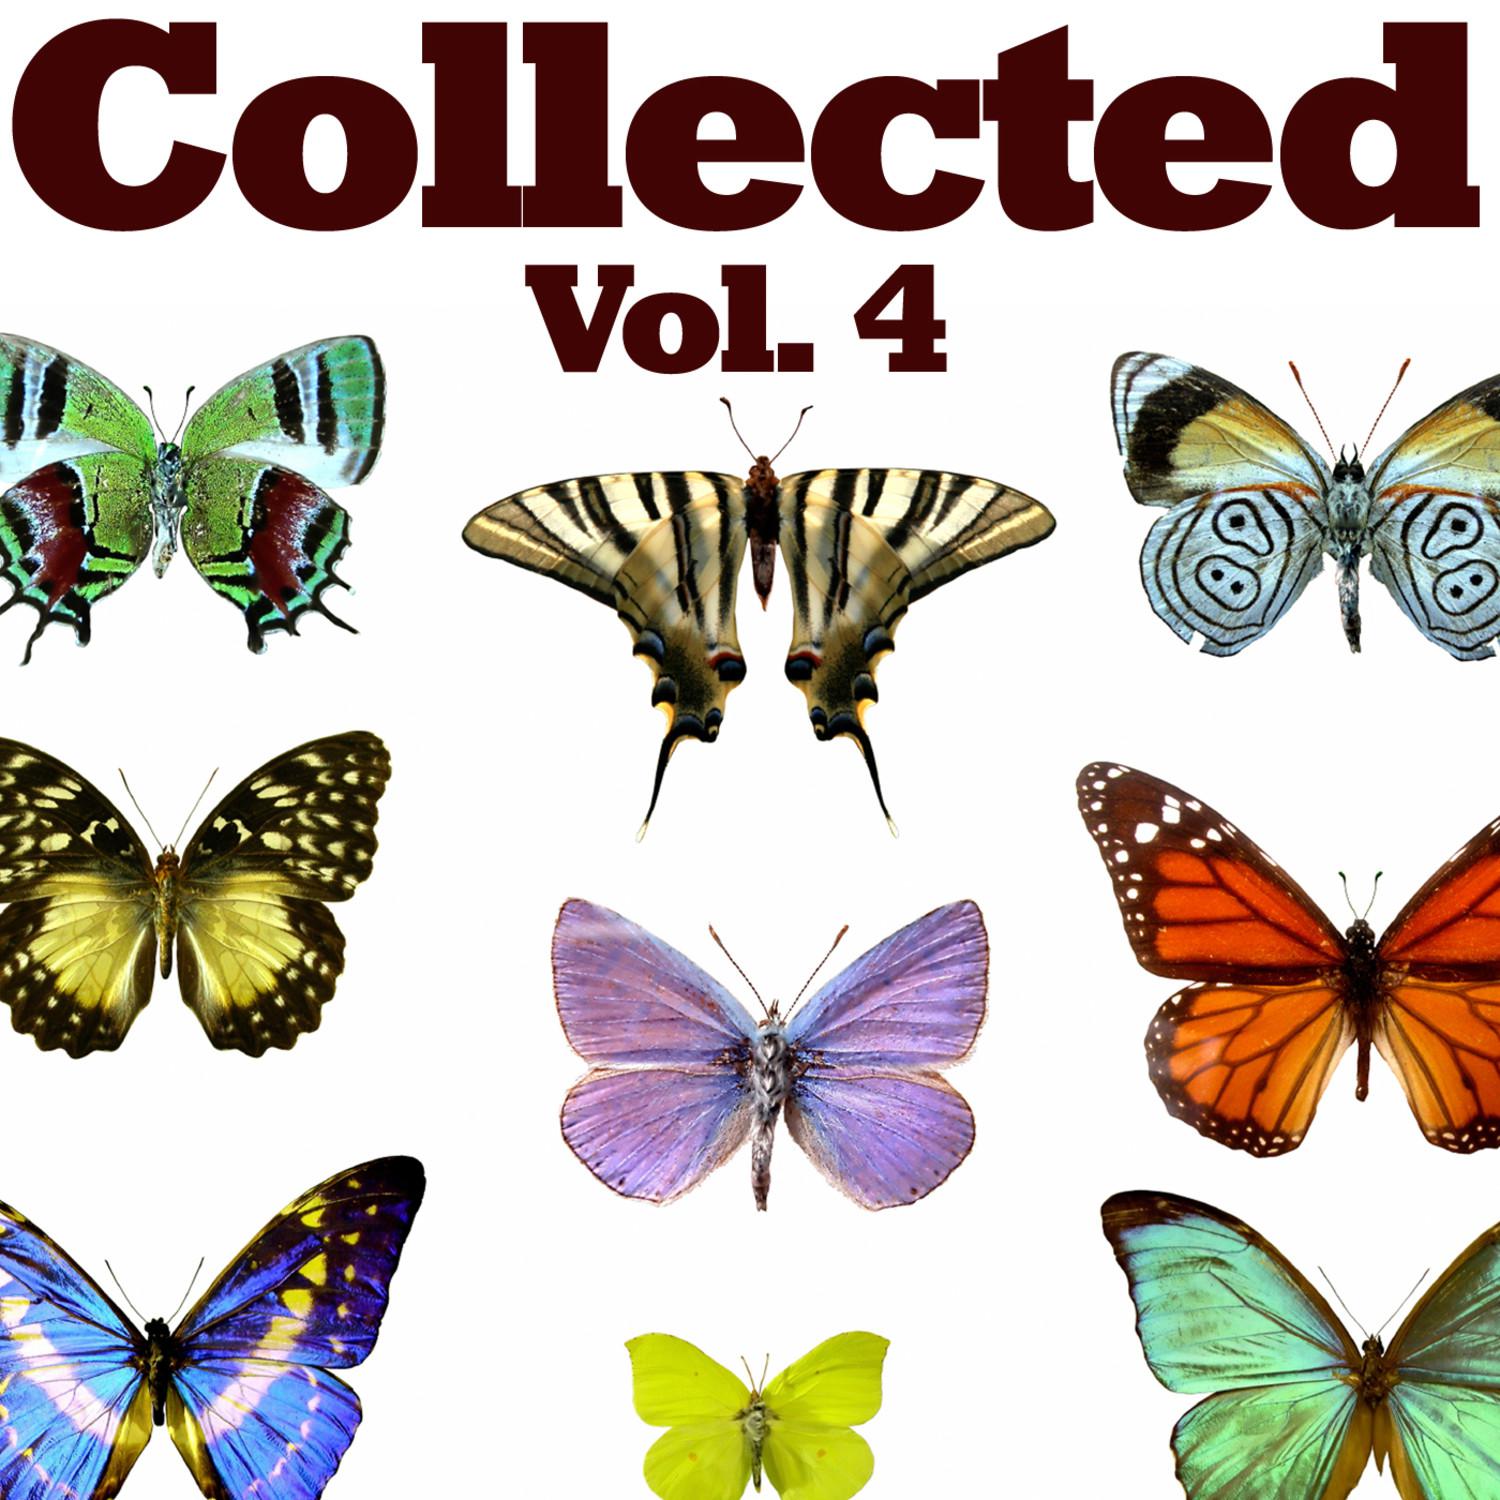 Collected Vol. 4